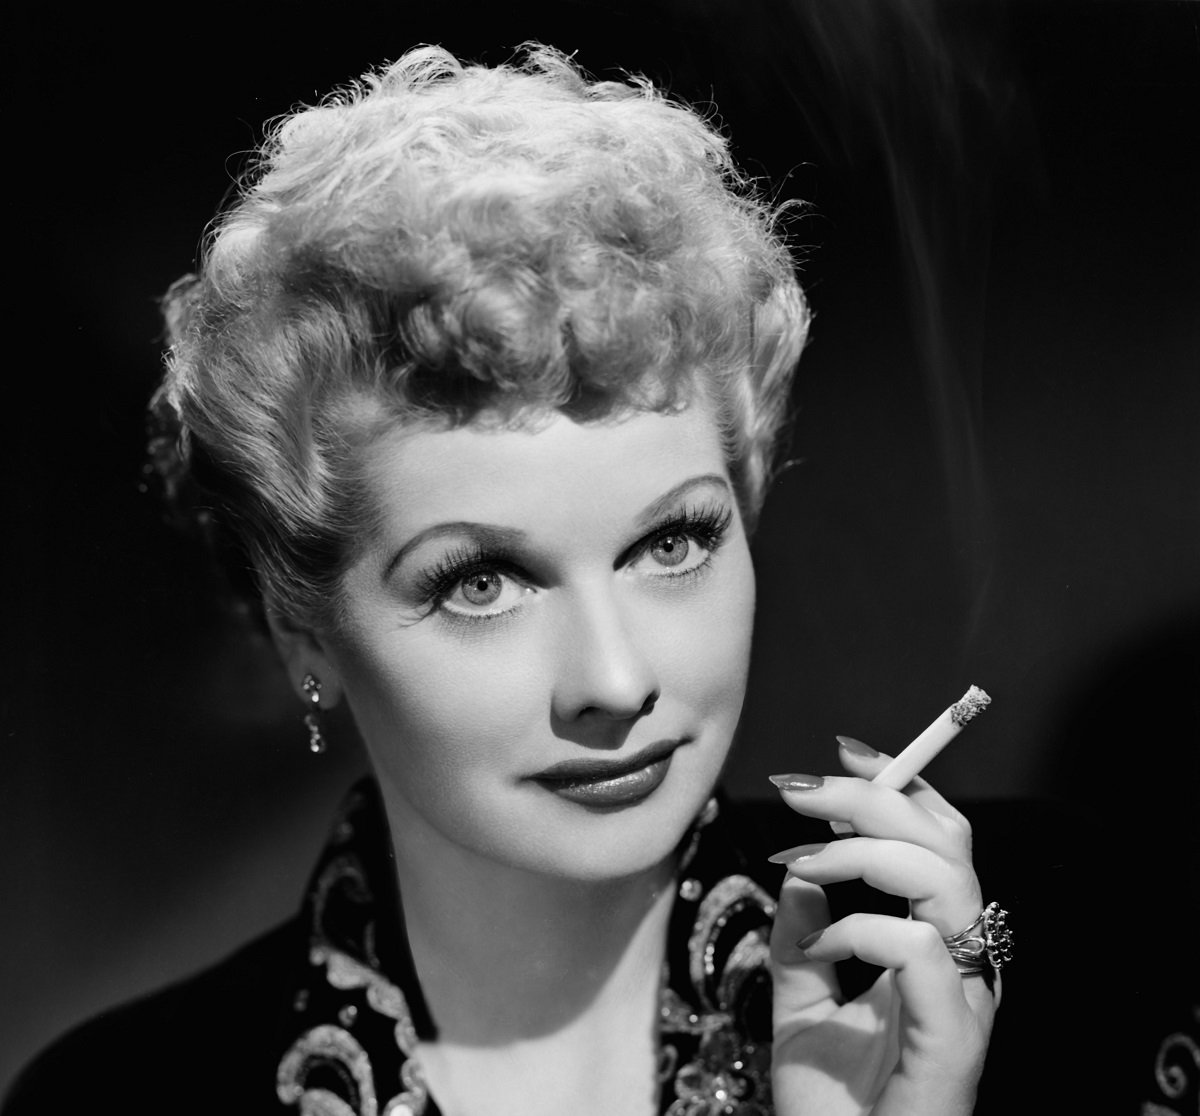 Lucille Ball poses for a portrait while holding a cigarette, circa 1940